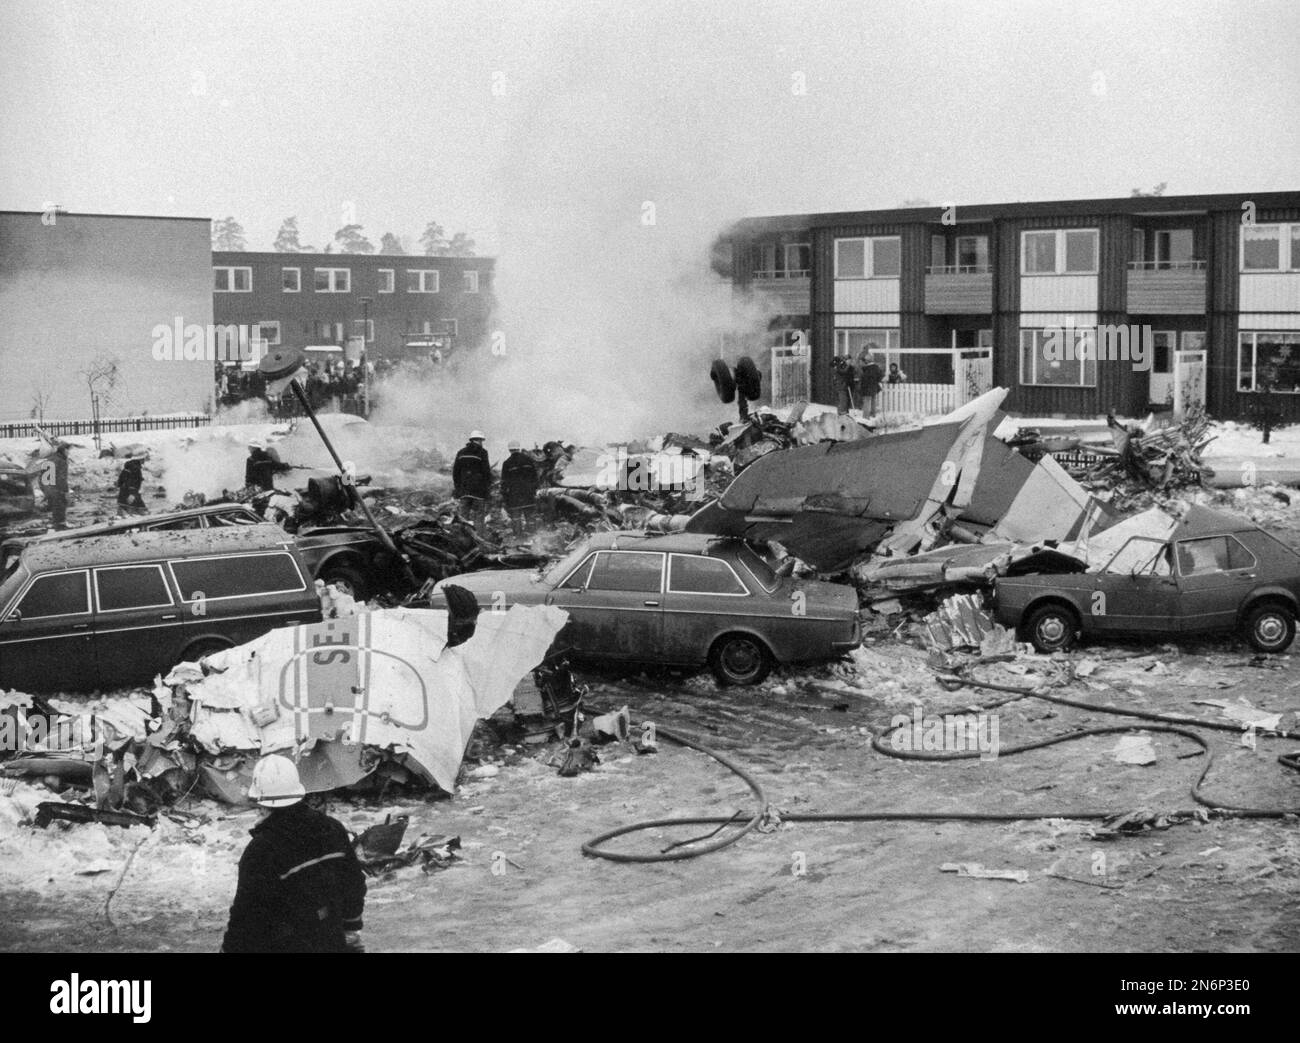 One of the worst aviation accidents in Sweden happened when an airliner crashed into a townhouse area in western Stockholm 1977.The accident was caused by atmosperic icing. Stock Photo